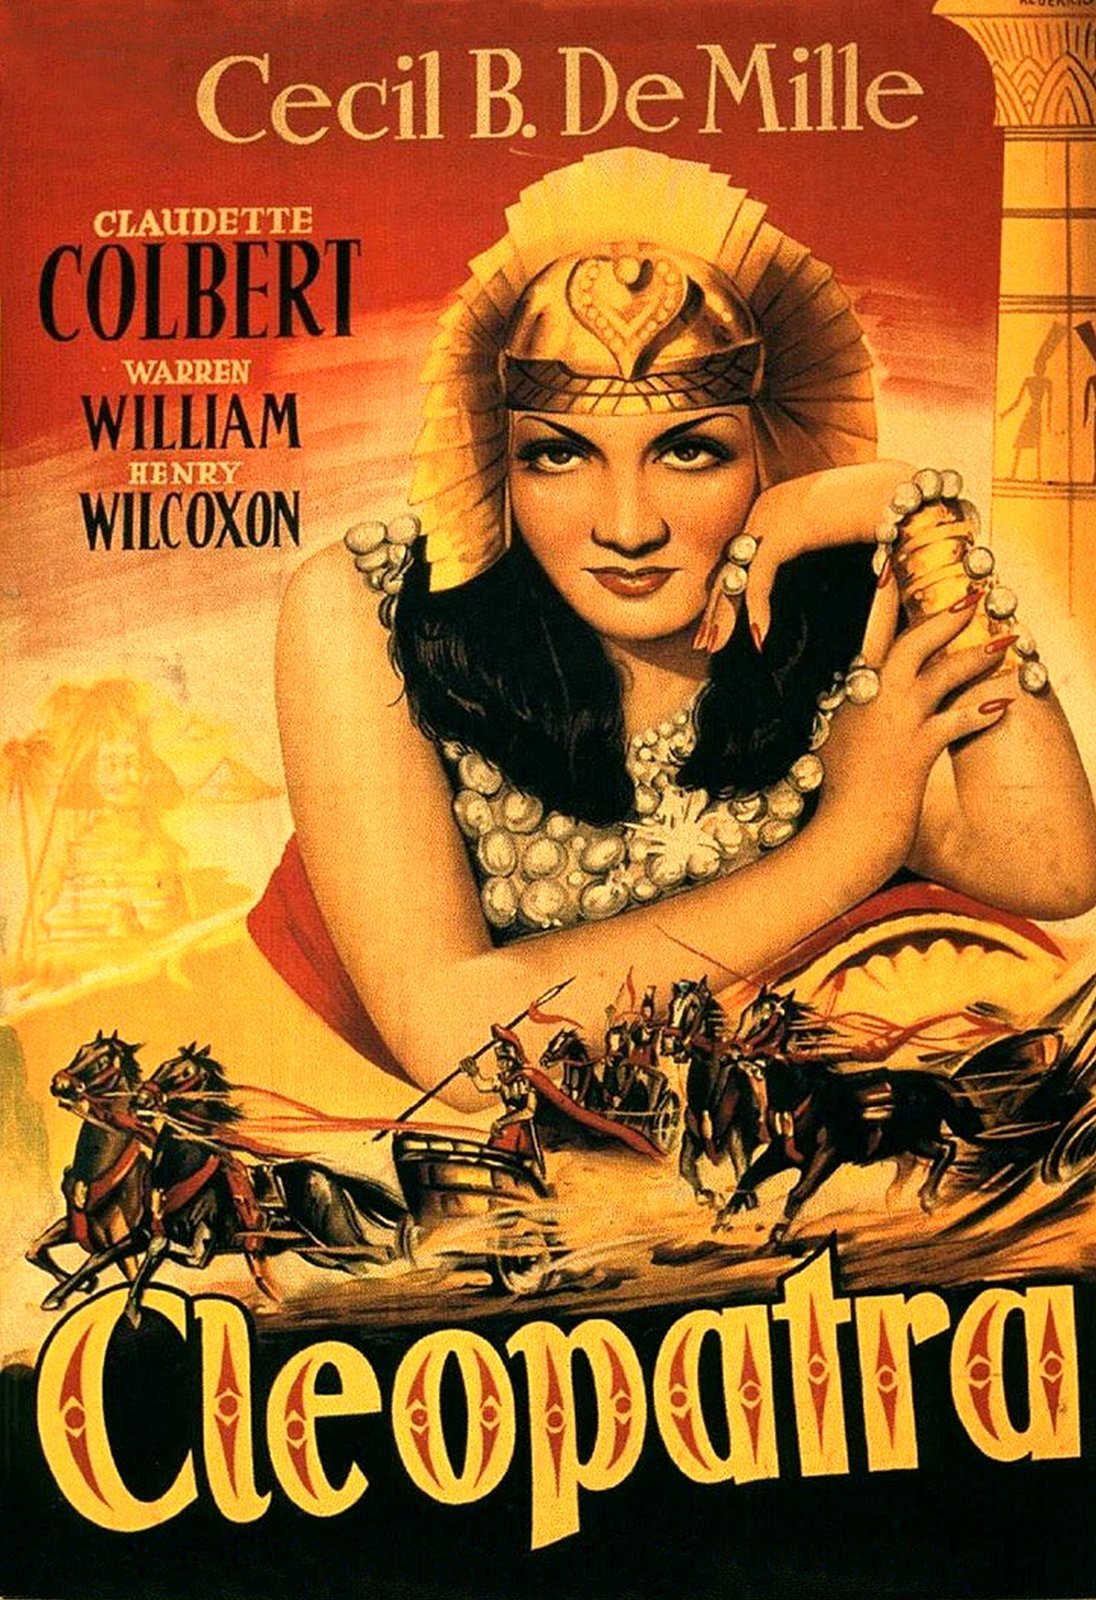 Cleopatra - Cecil B. DeMilles - Limited Edition (blu-ray)